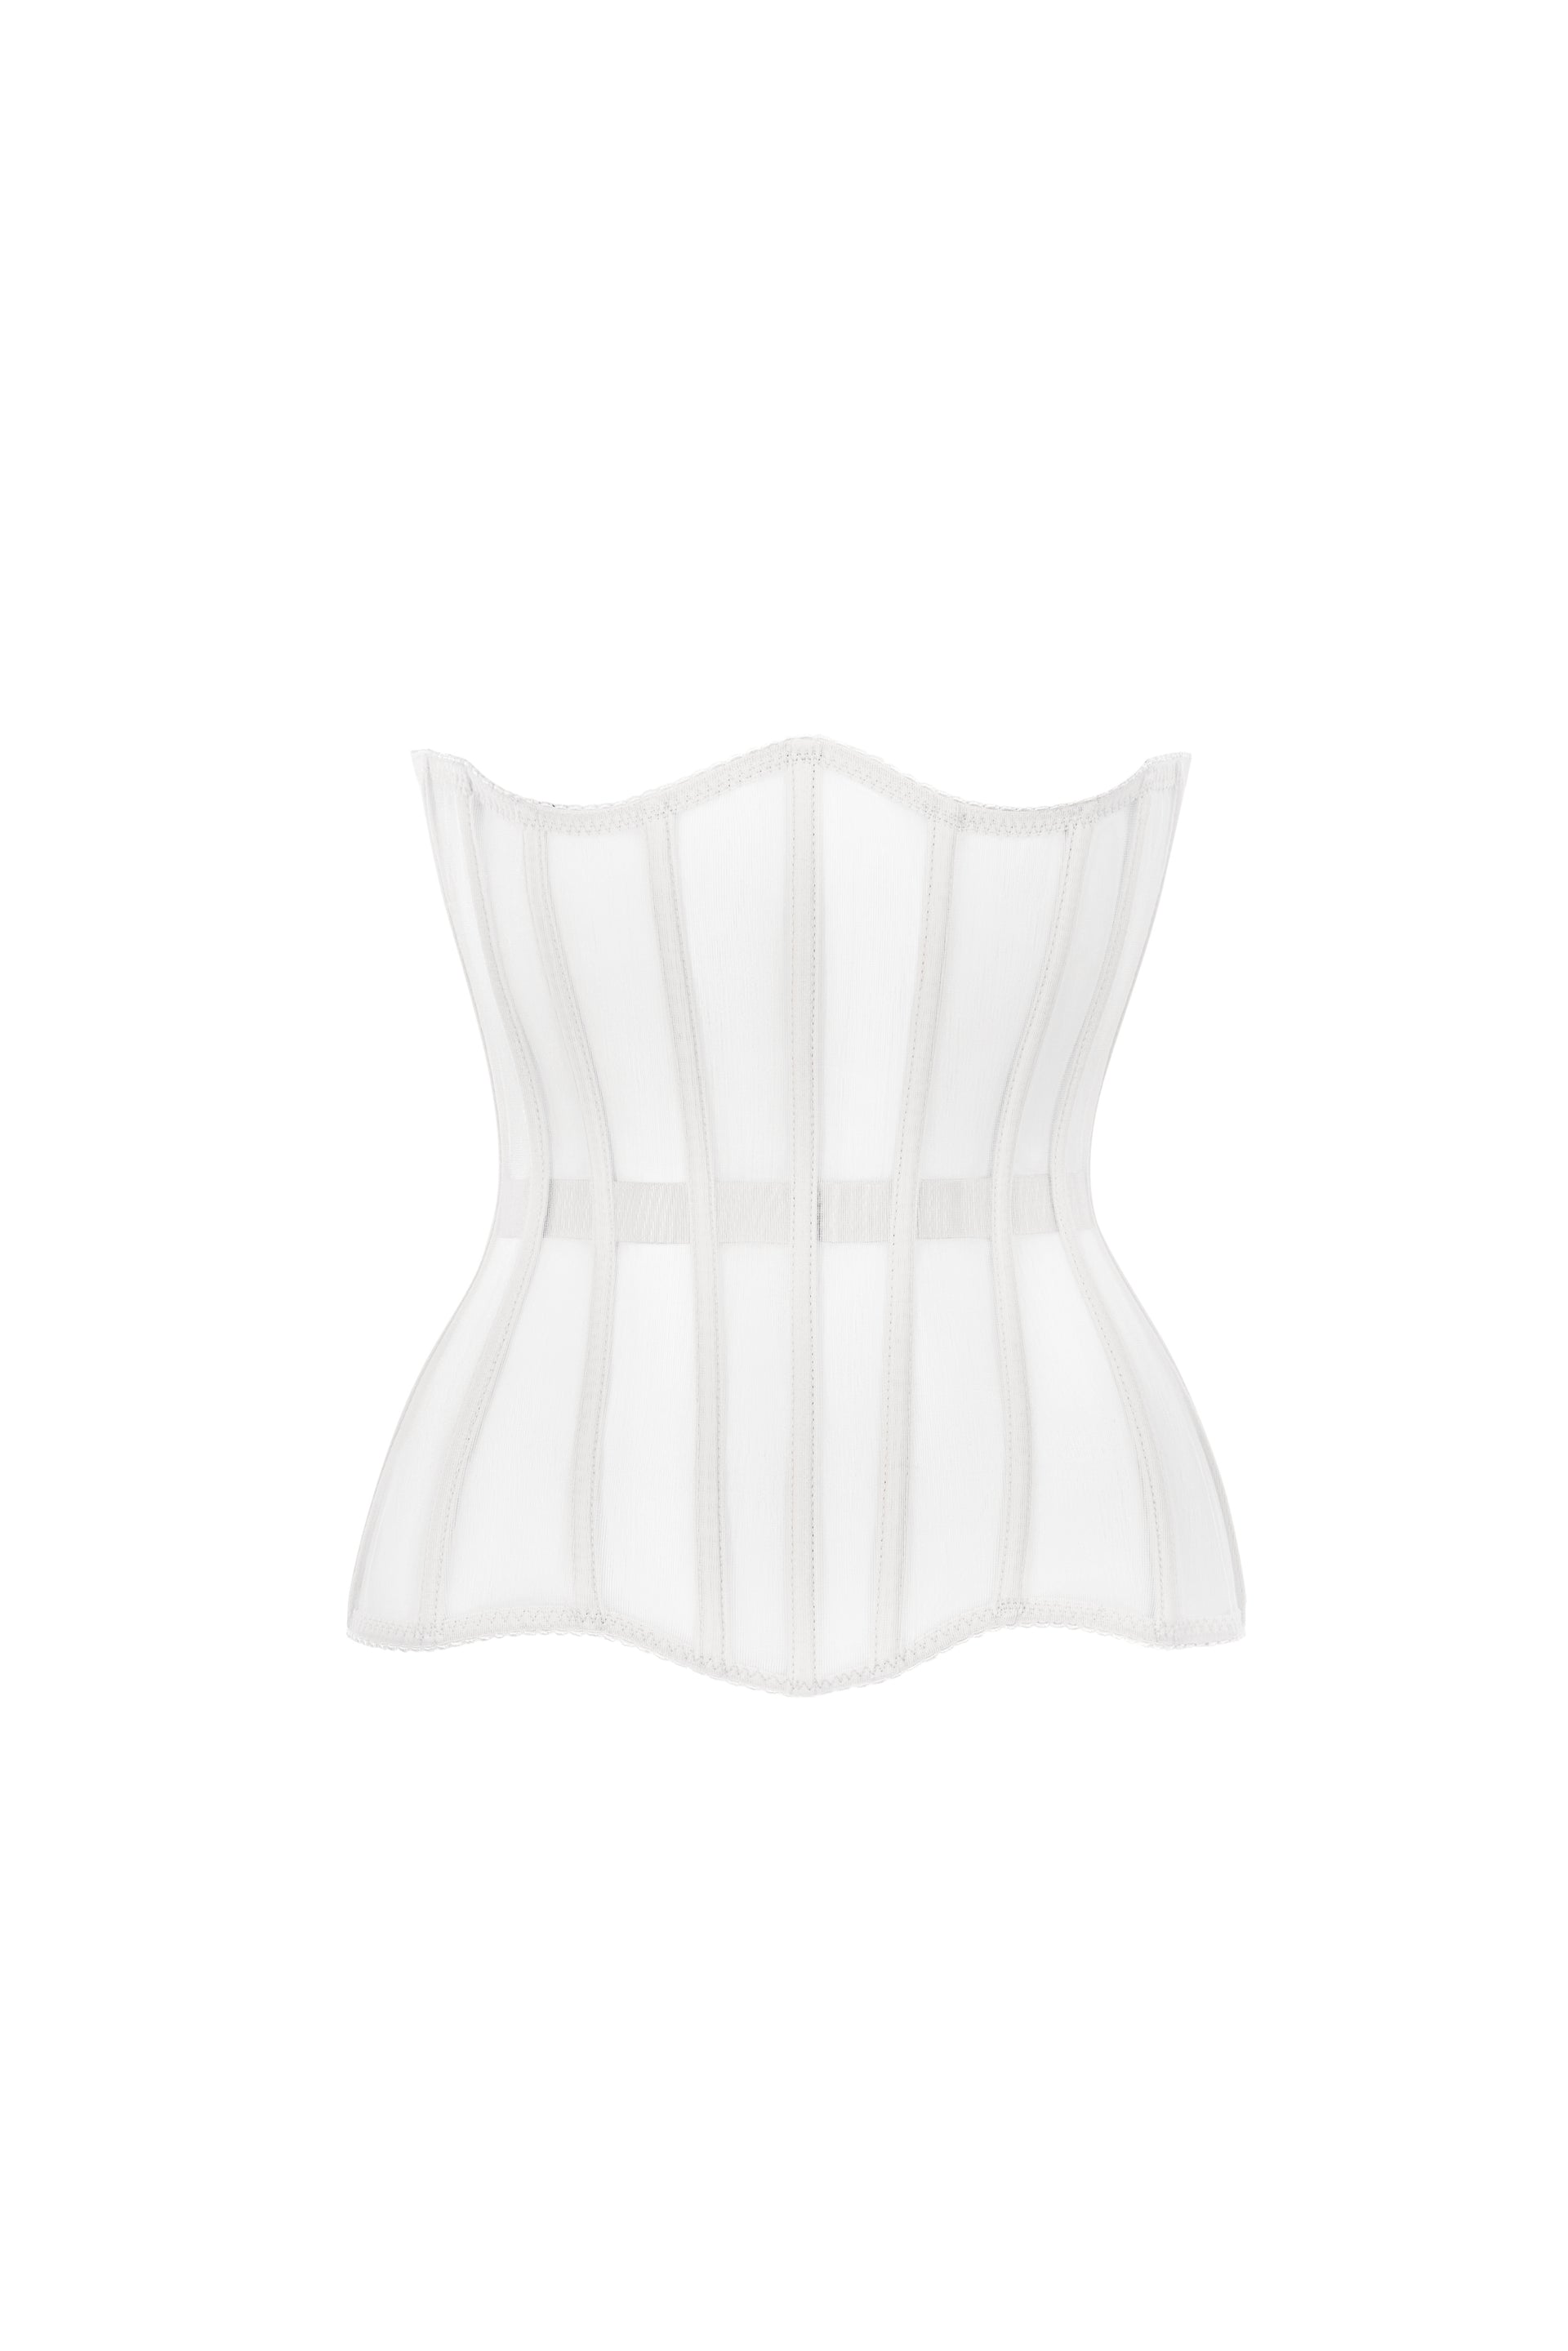 White corset without cups